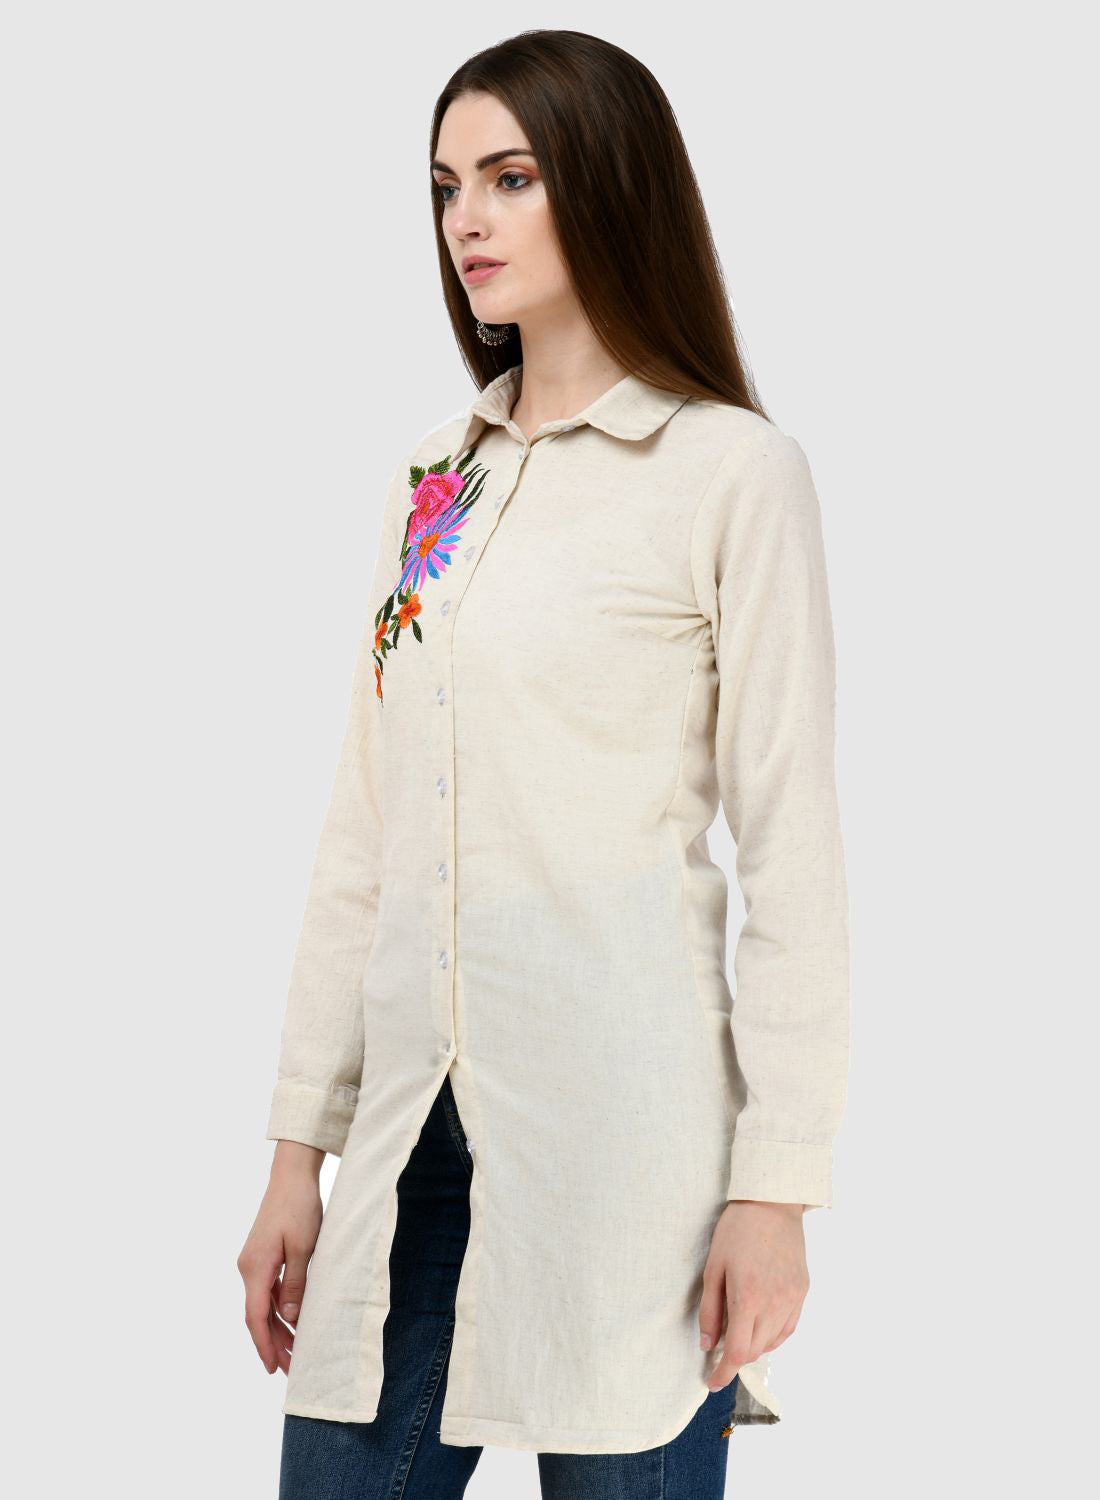 Women Top White Tunic Regular Fit Full Sleeve Embroidery Work